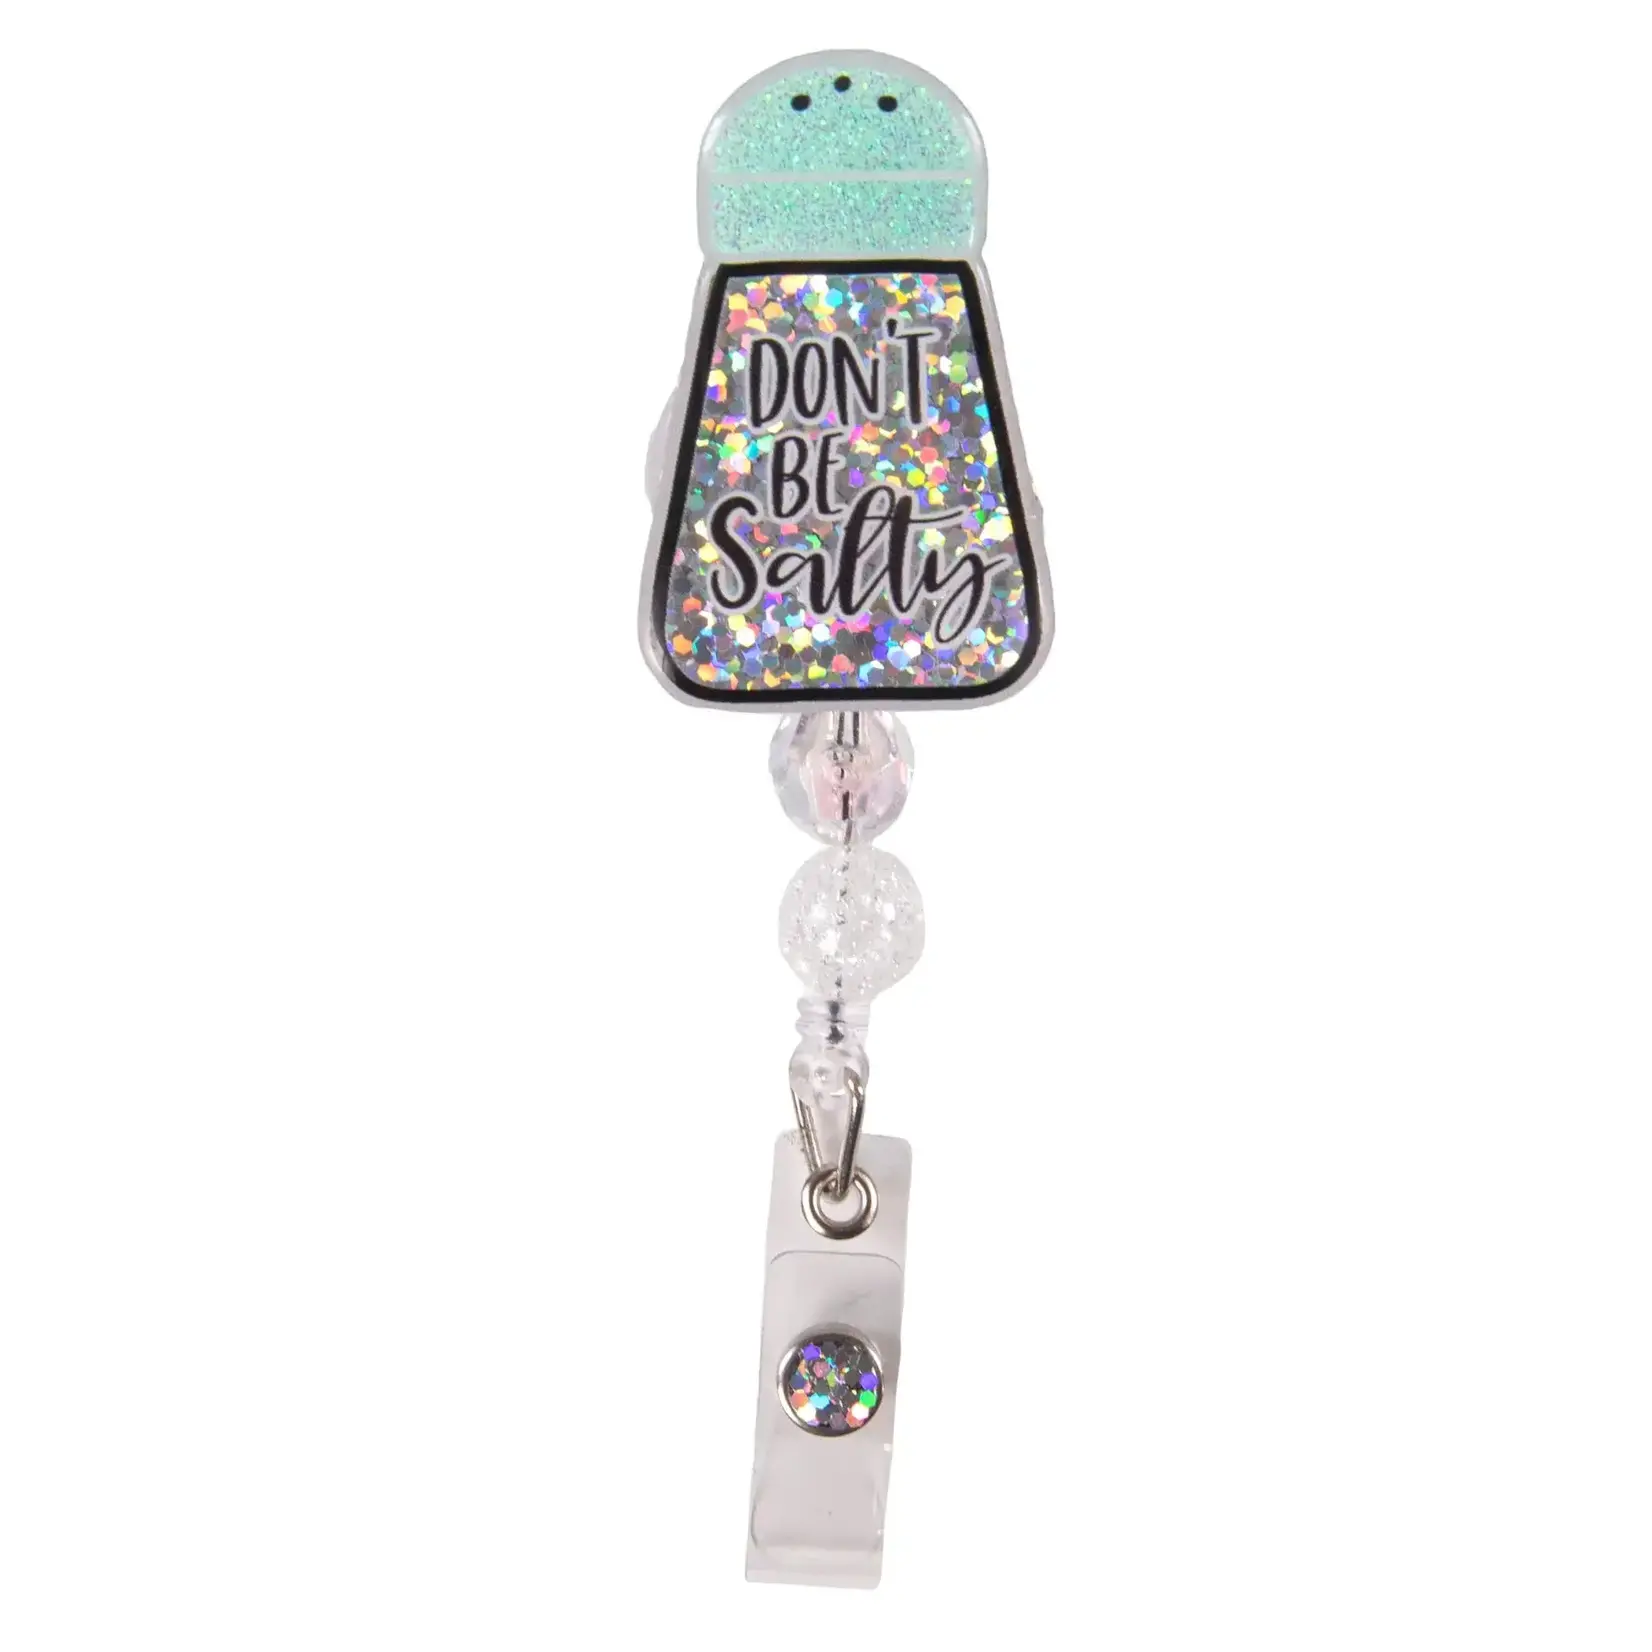 BADGE REEL - SALTY - Southern Accents MS